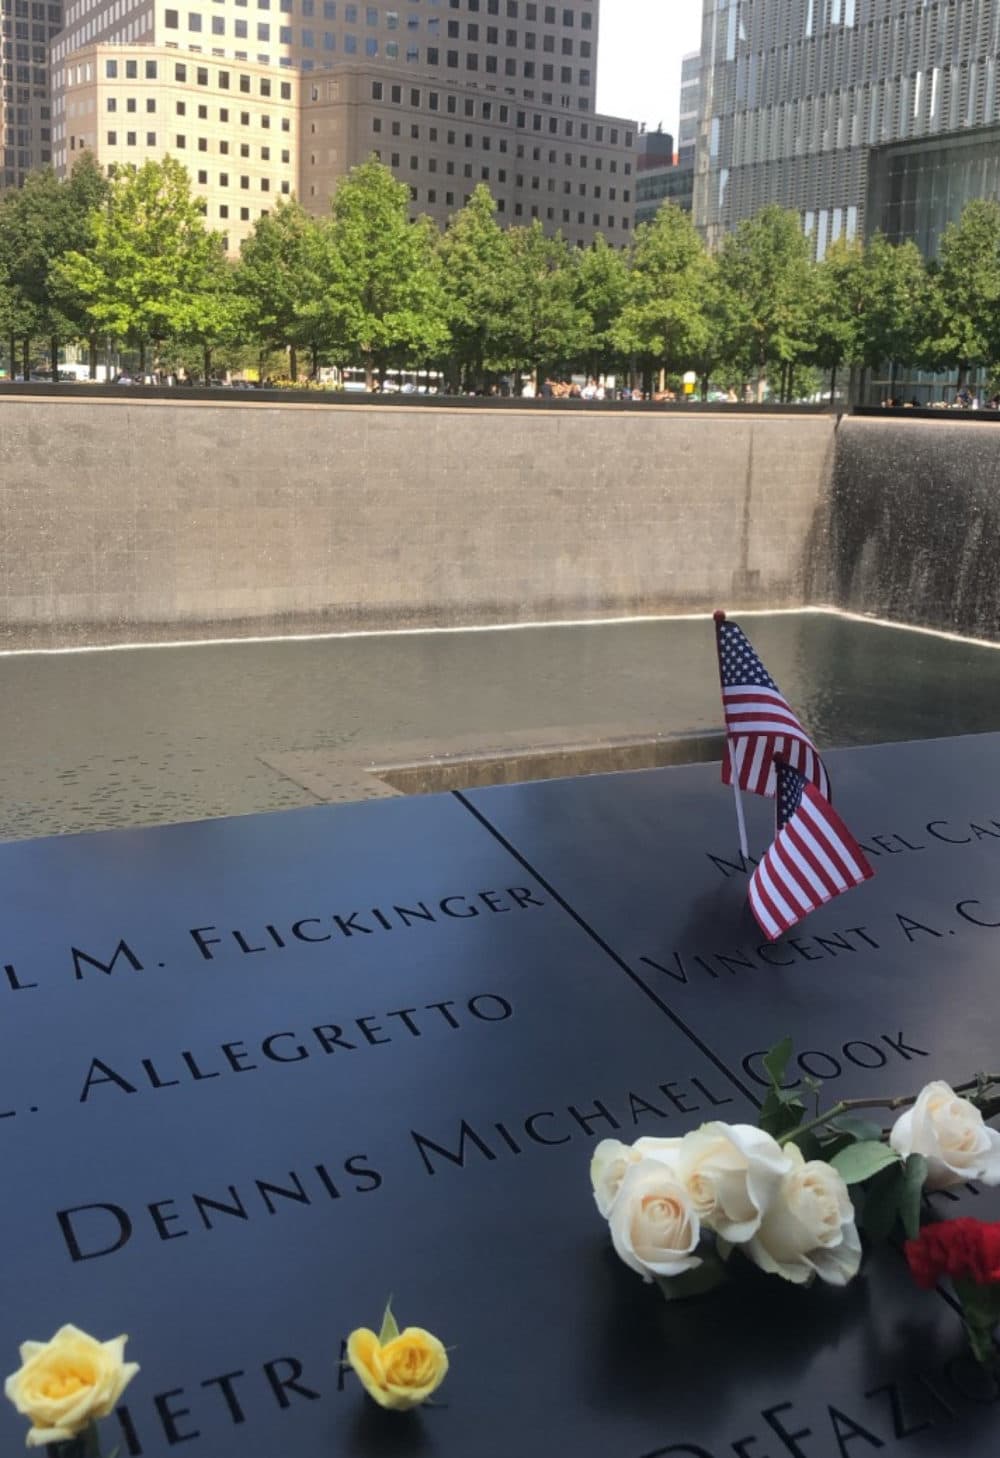 Dennis Cook's name etched into the 9/11 memorial in New York. (Courtesy Lindsay Cook)